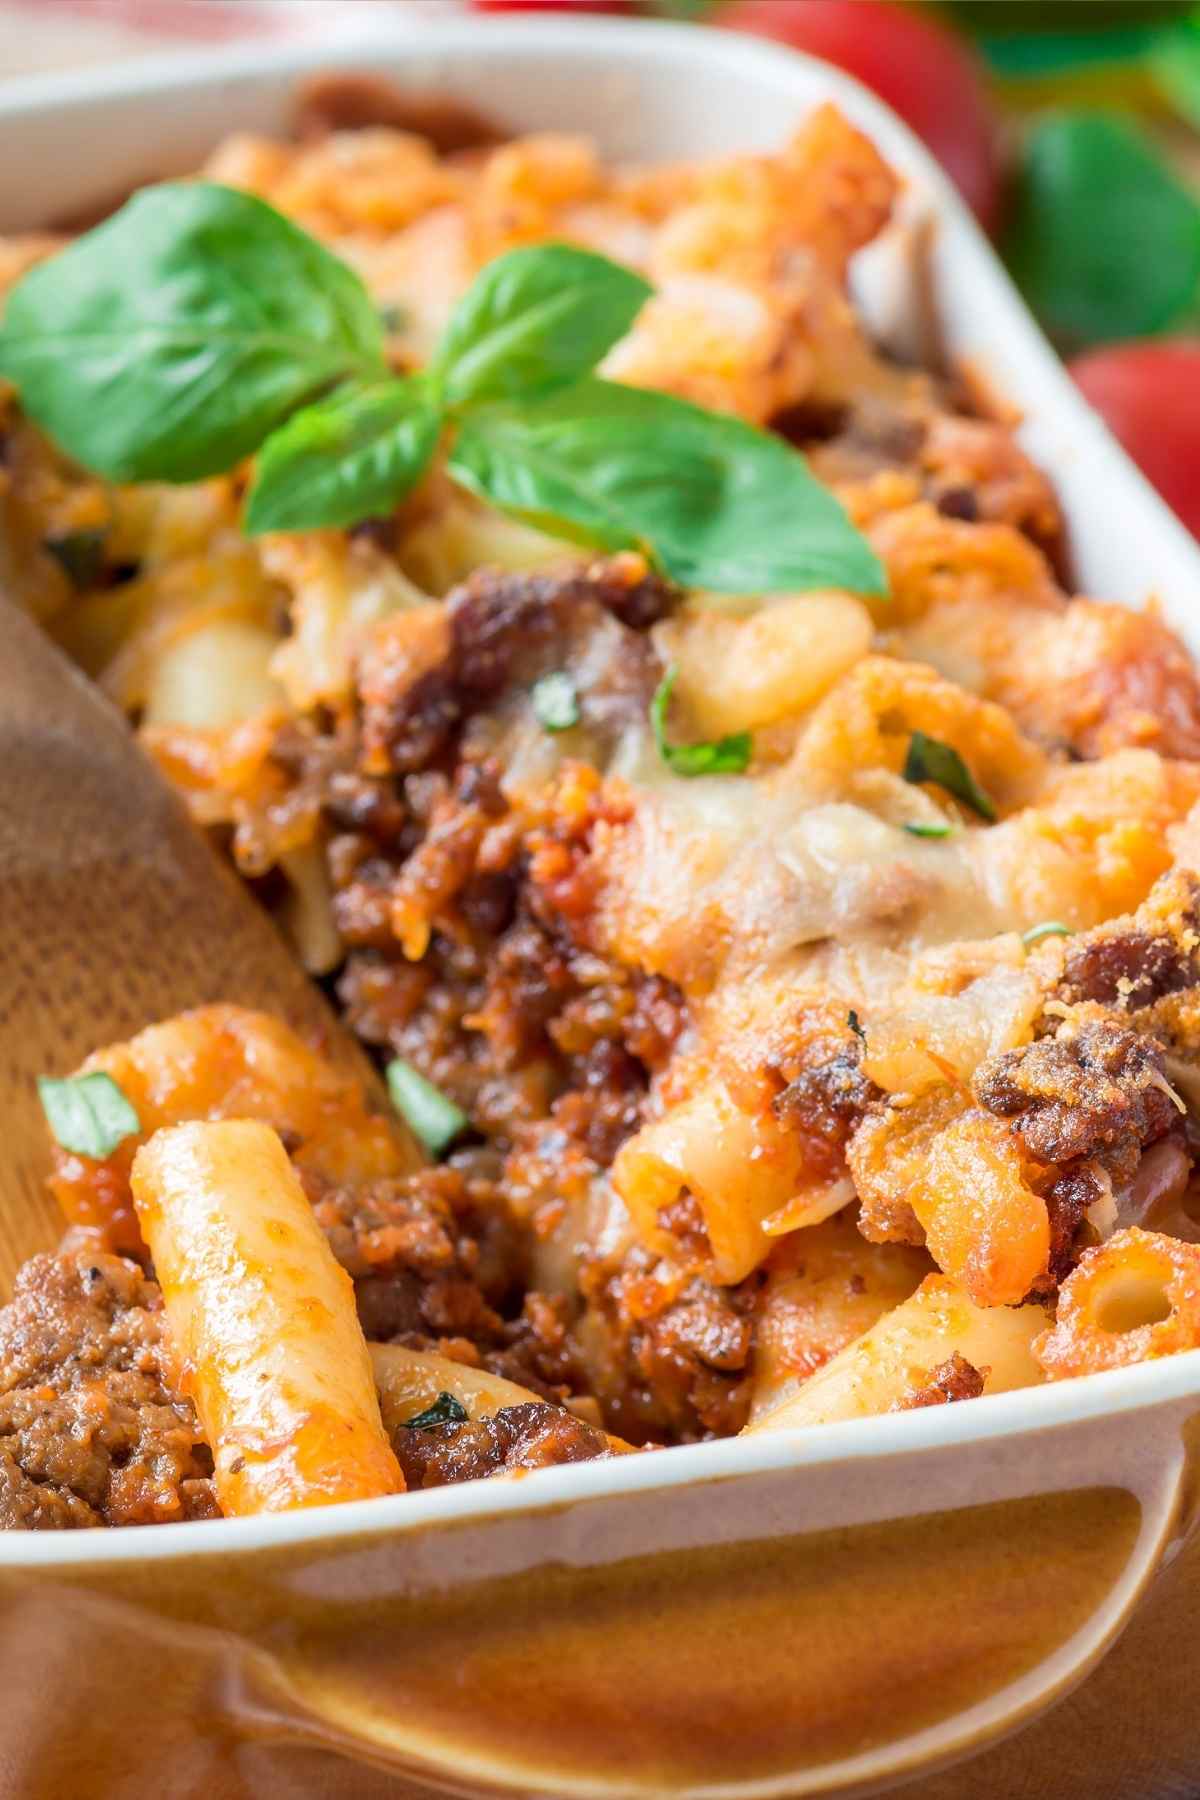 This Baked Ziti With Italian Sausage is hearty, comforting, and delicious. It’s a satisfying dish featuring savory Italian sausage, tender pasta, three kinds of cheese, and a rich tomato sauce.